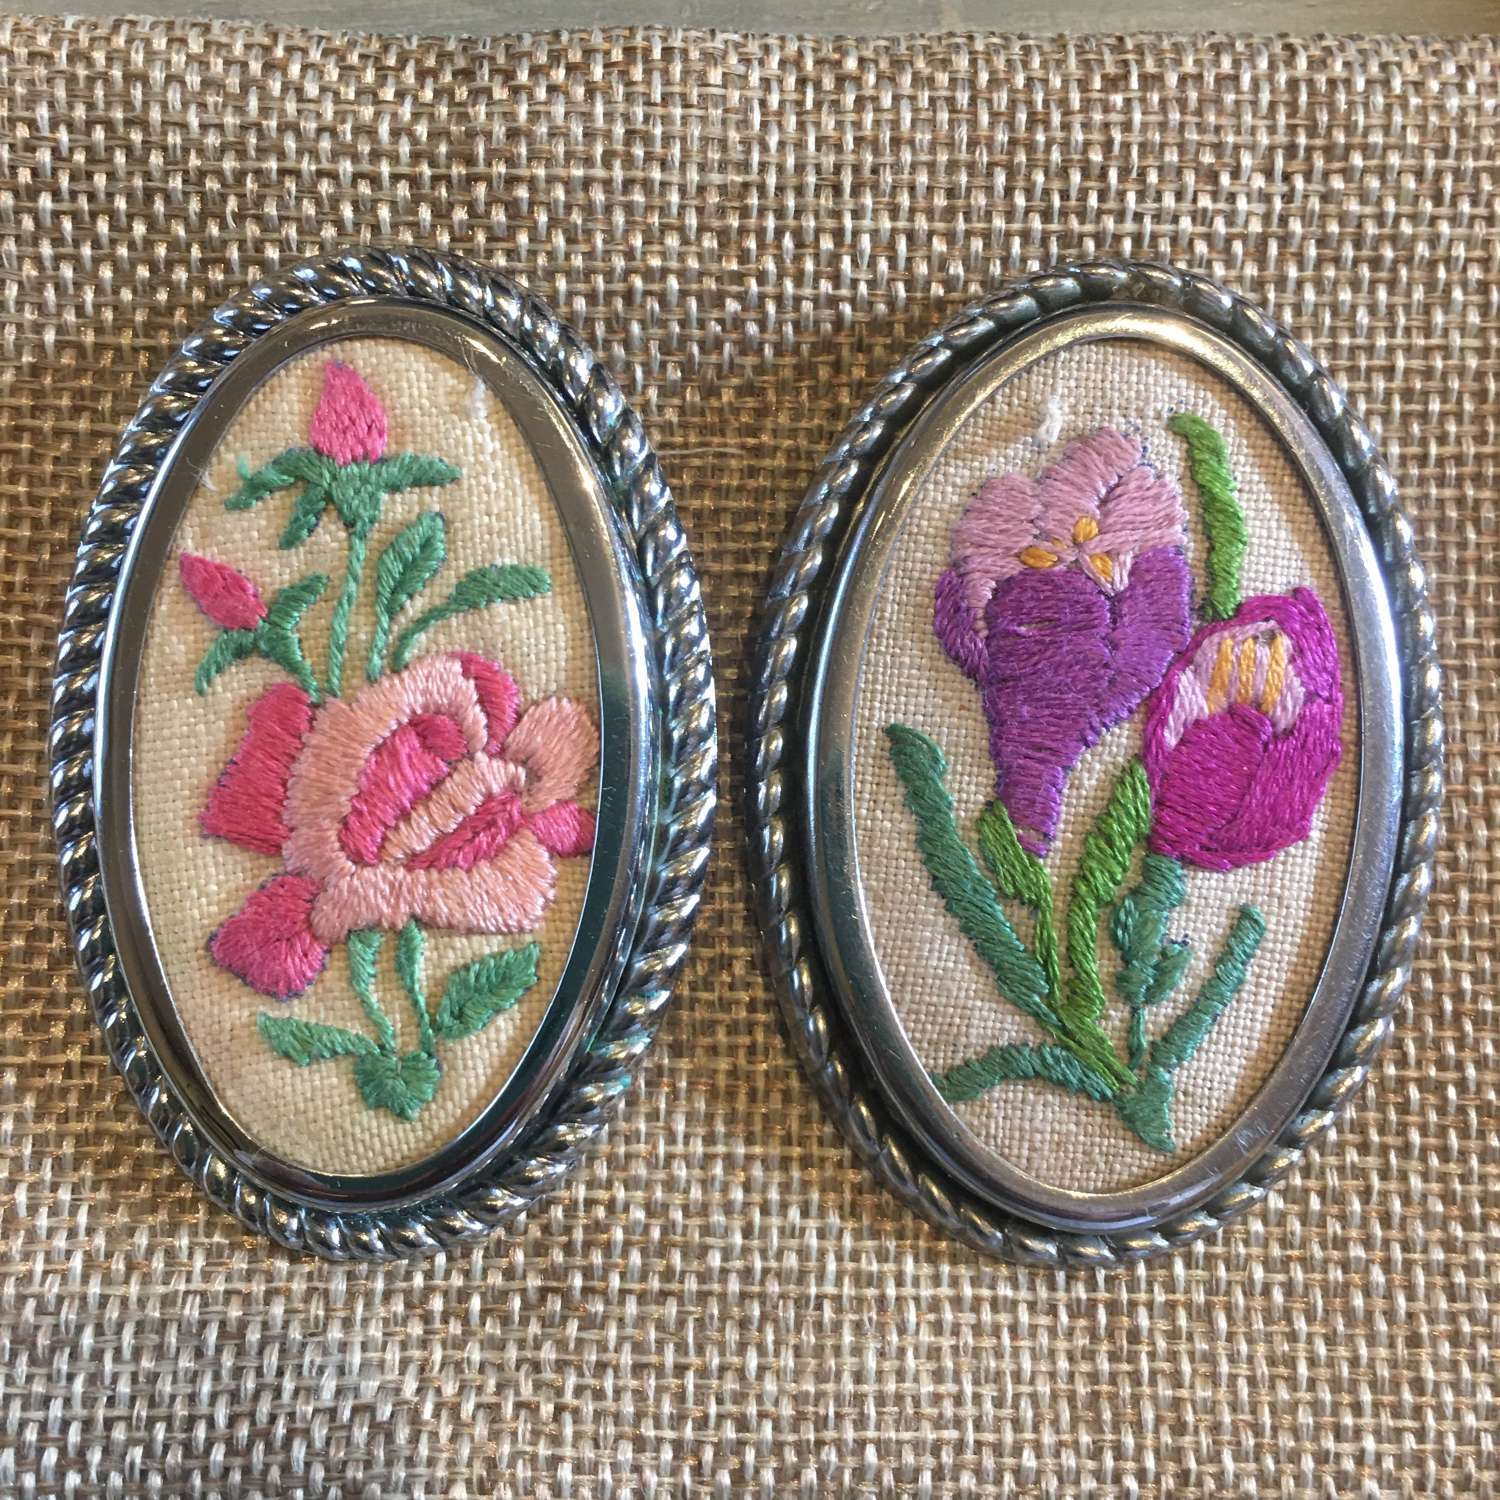 1950s hand embroidered floral brooches 2 available